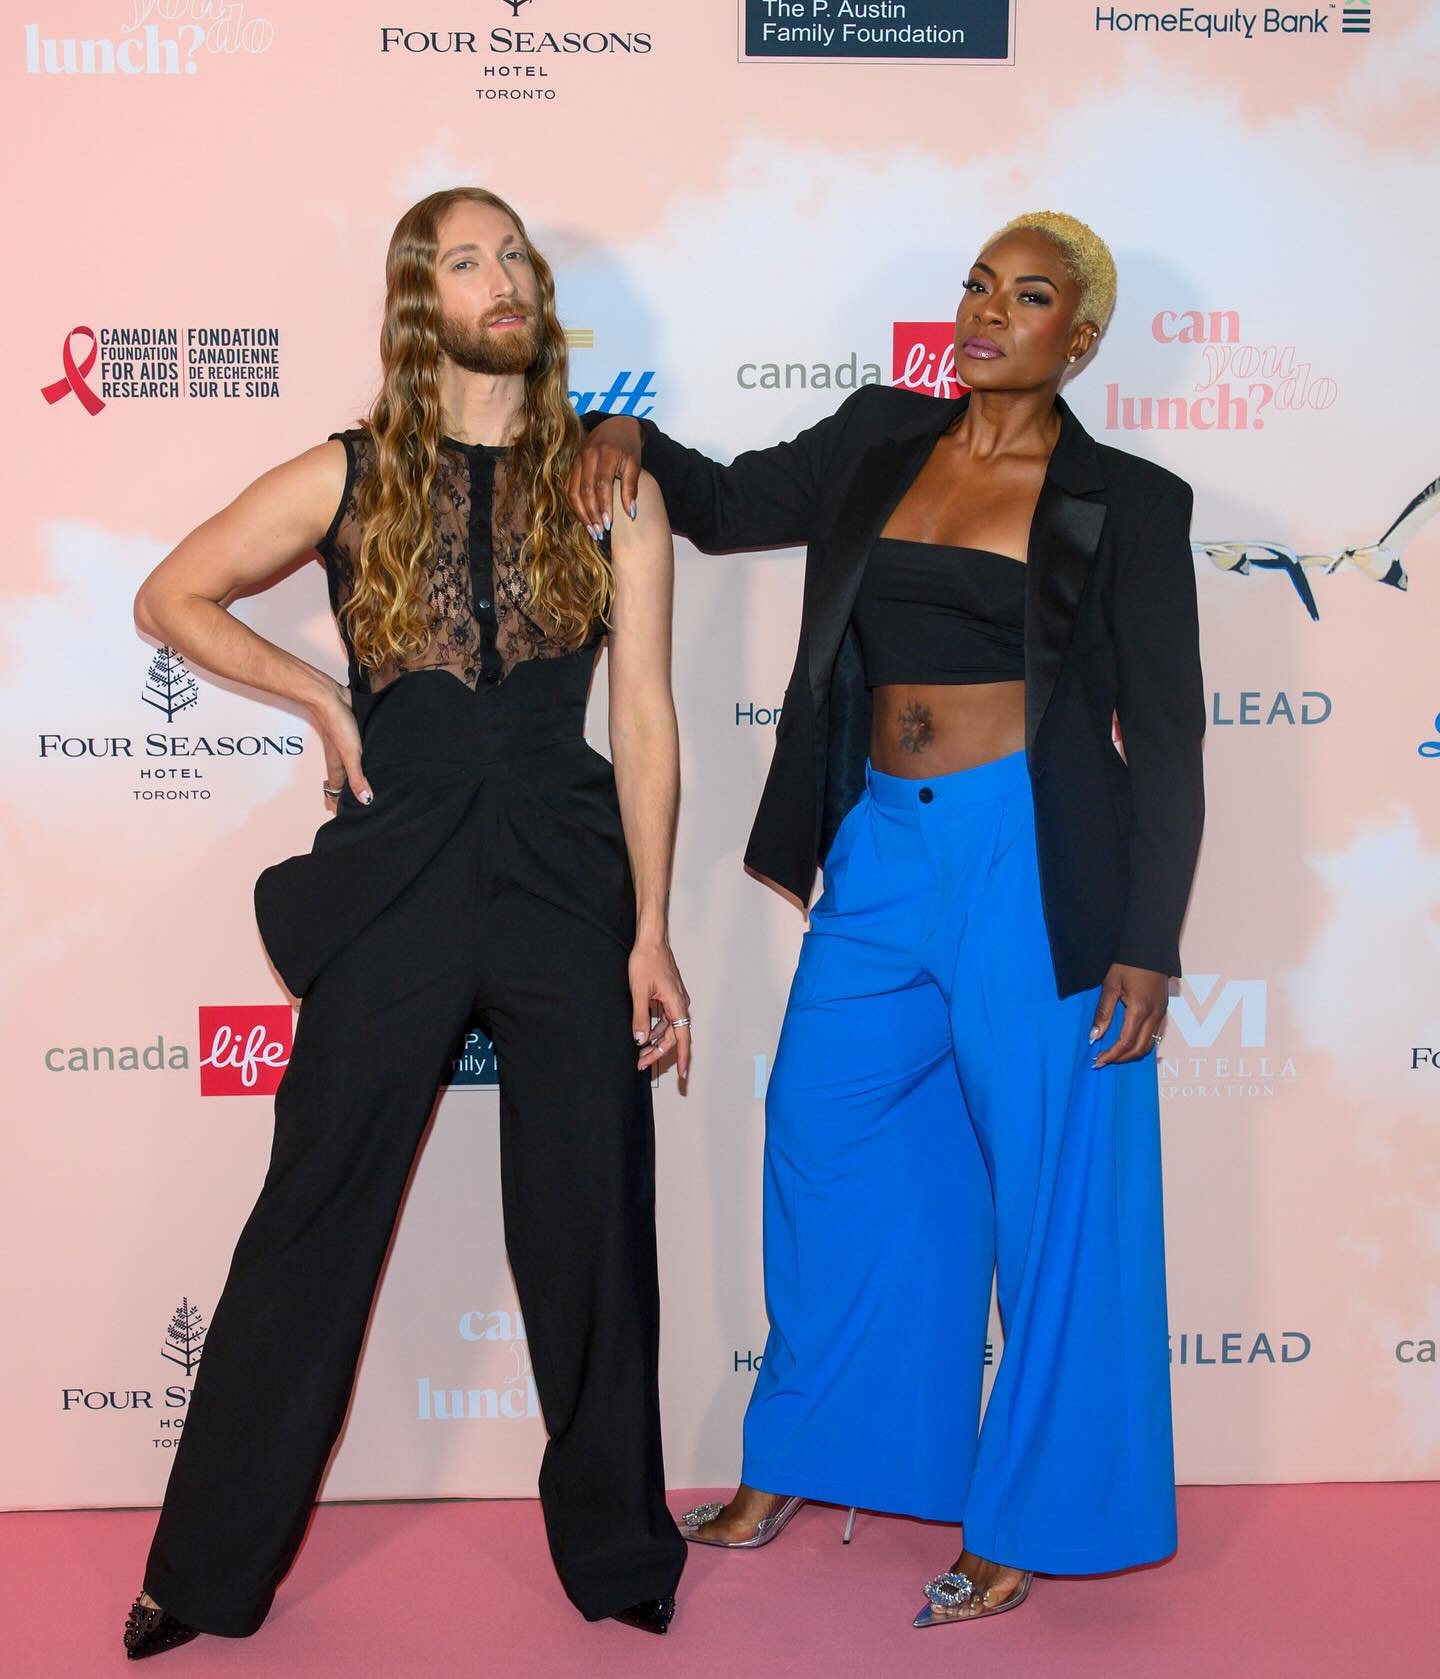 Thank you for everyone&rsquo;s hard work and donations. @canfar1987 Can You Do Lunch we helped raise 300k this year for #hivaids research, and helping to create more access to testing and care! 

Also huge thank you to @missjullyblack for such a powe